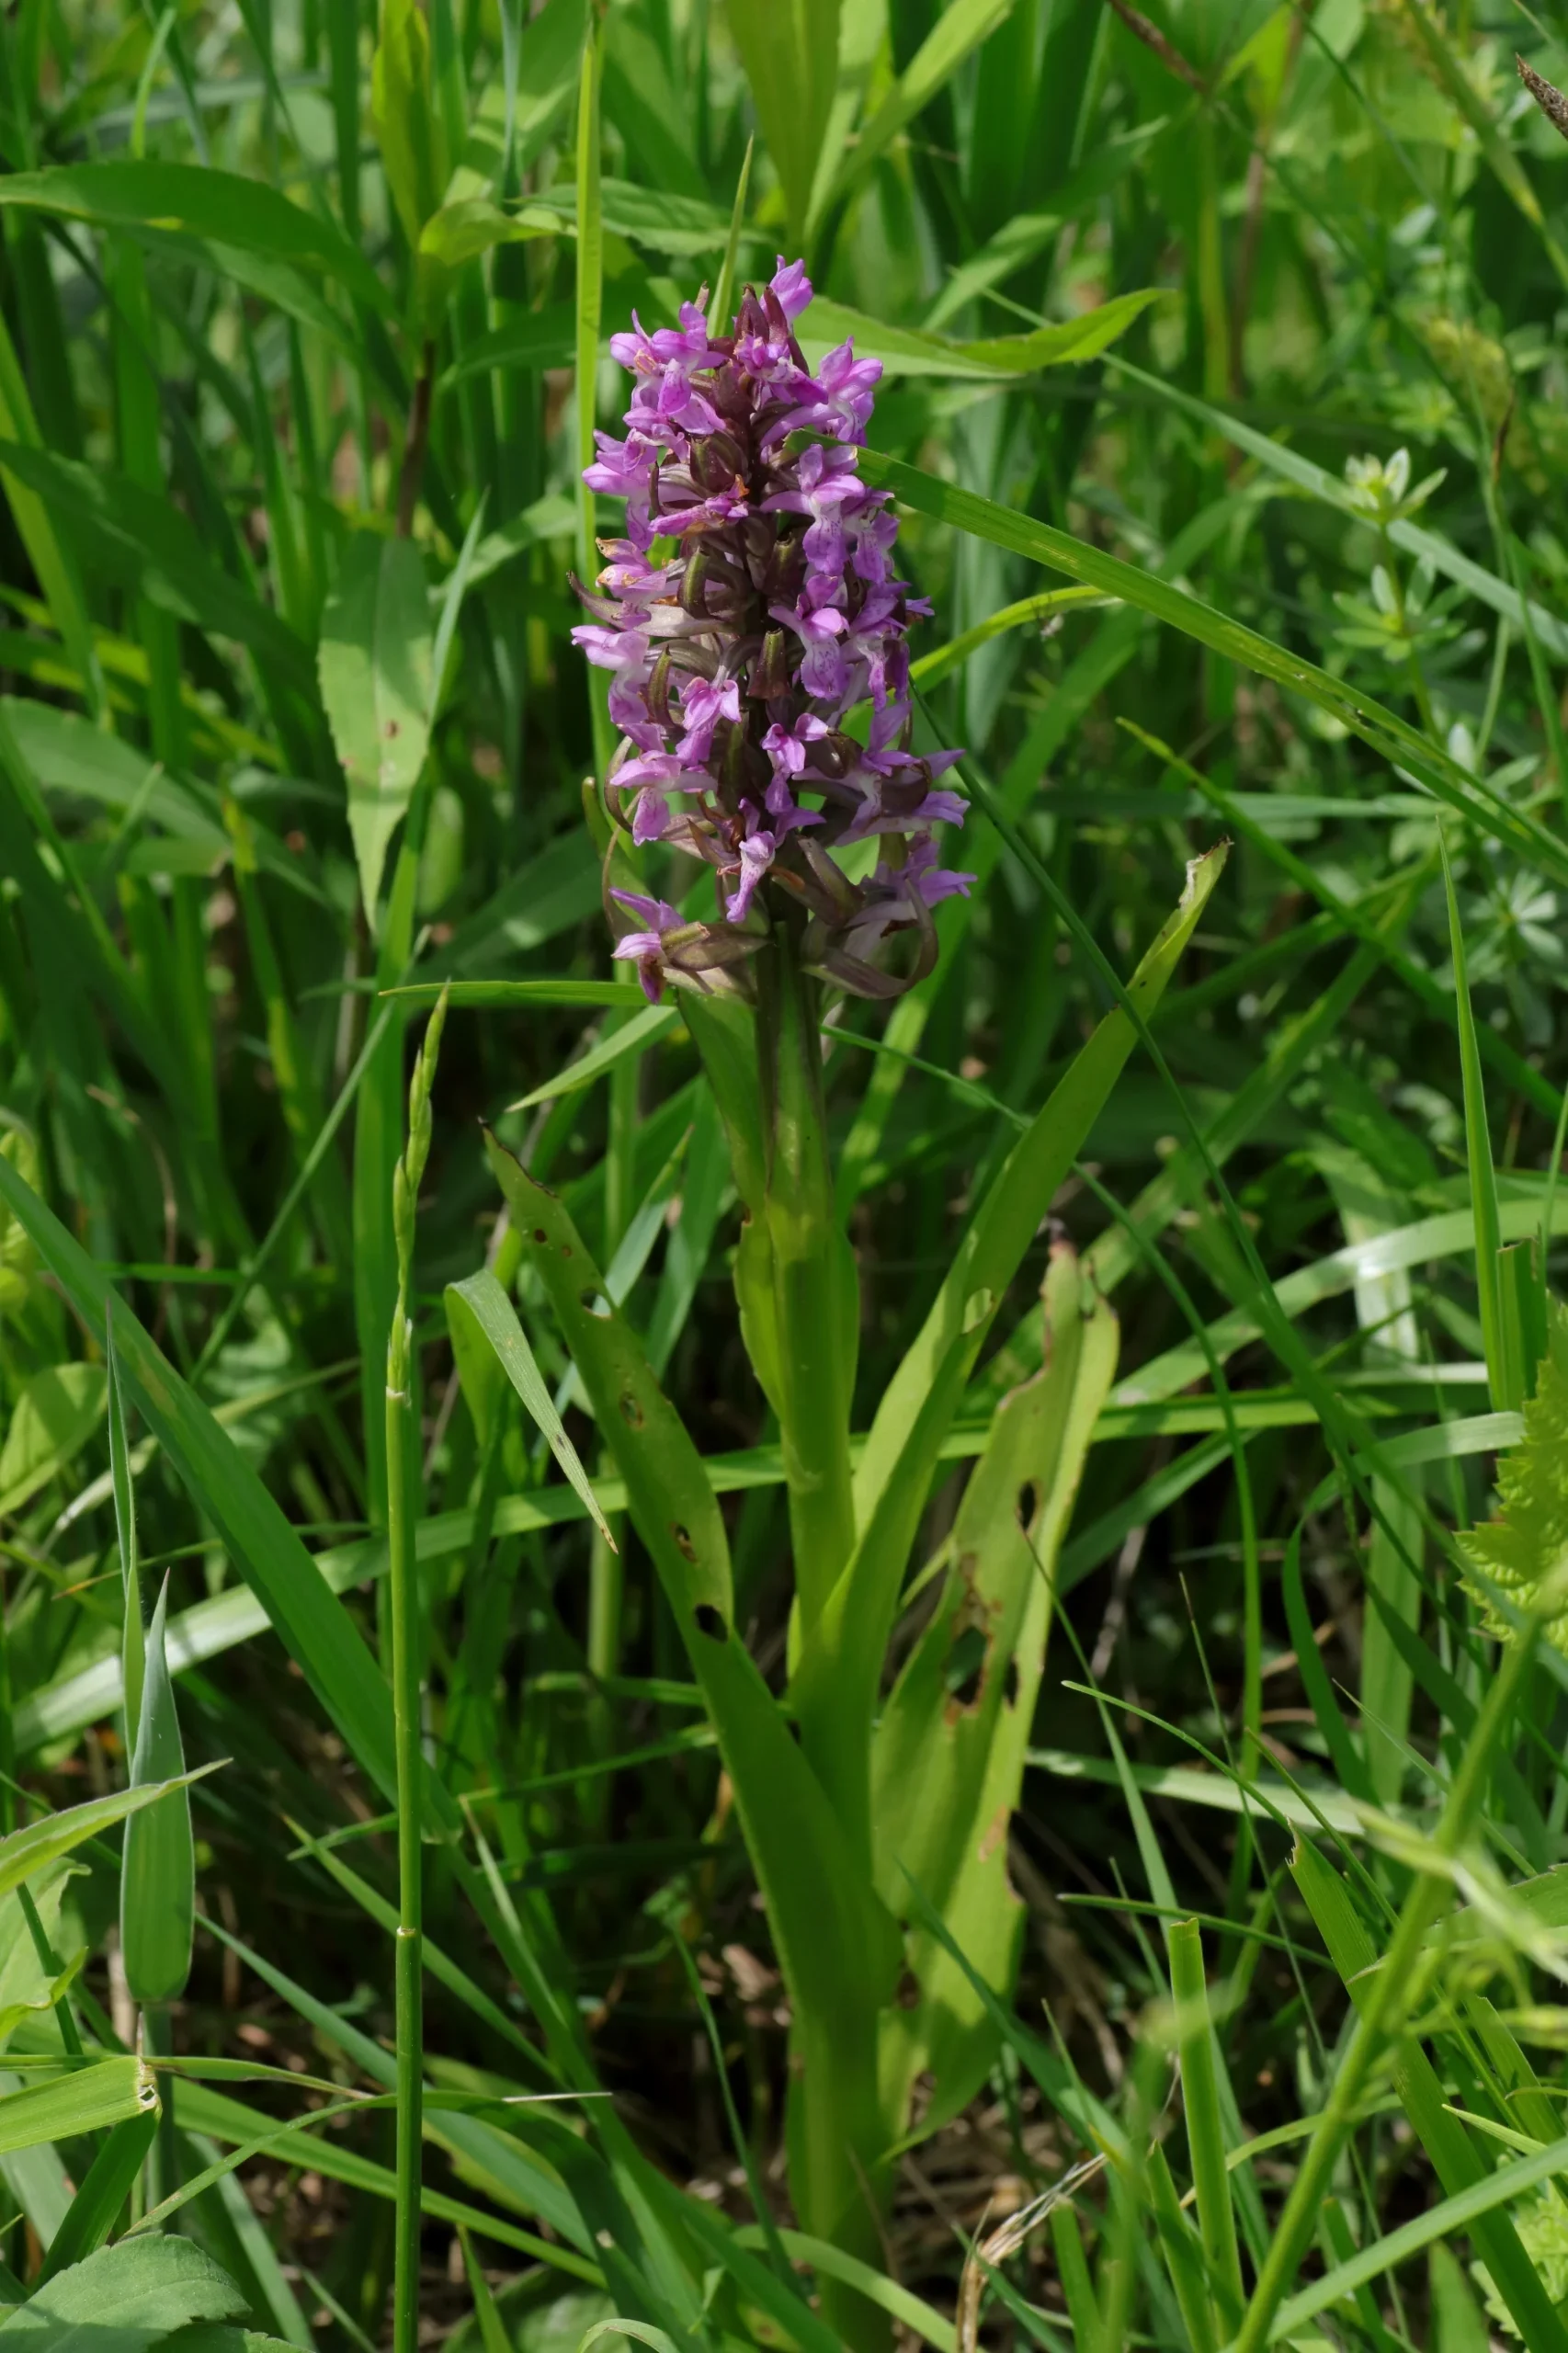 The pink flower of the flesh-coloured orchid - The flowers are butterfly-shaped and arranged upright in a panicle on the stem. It is in a meadow in the Eriskircher Ried.